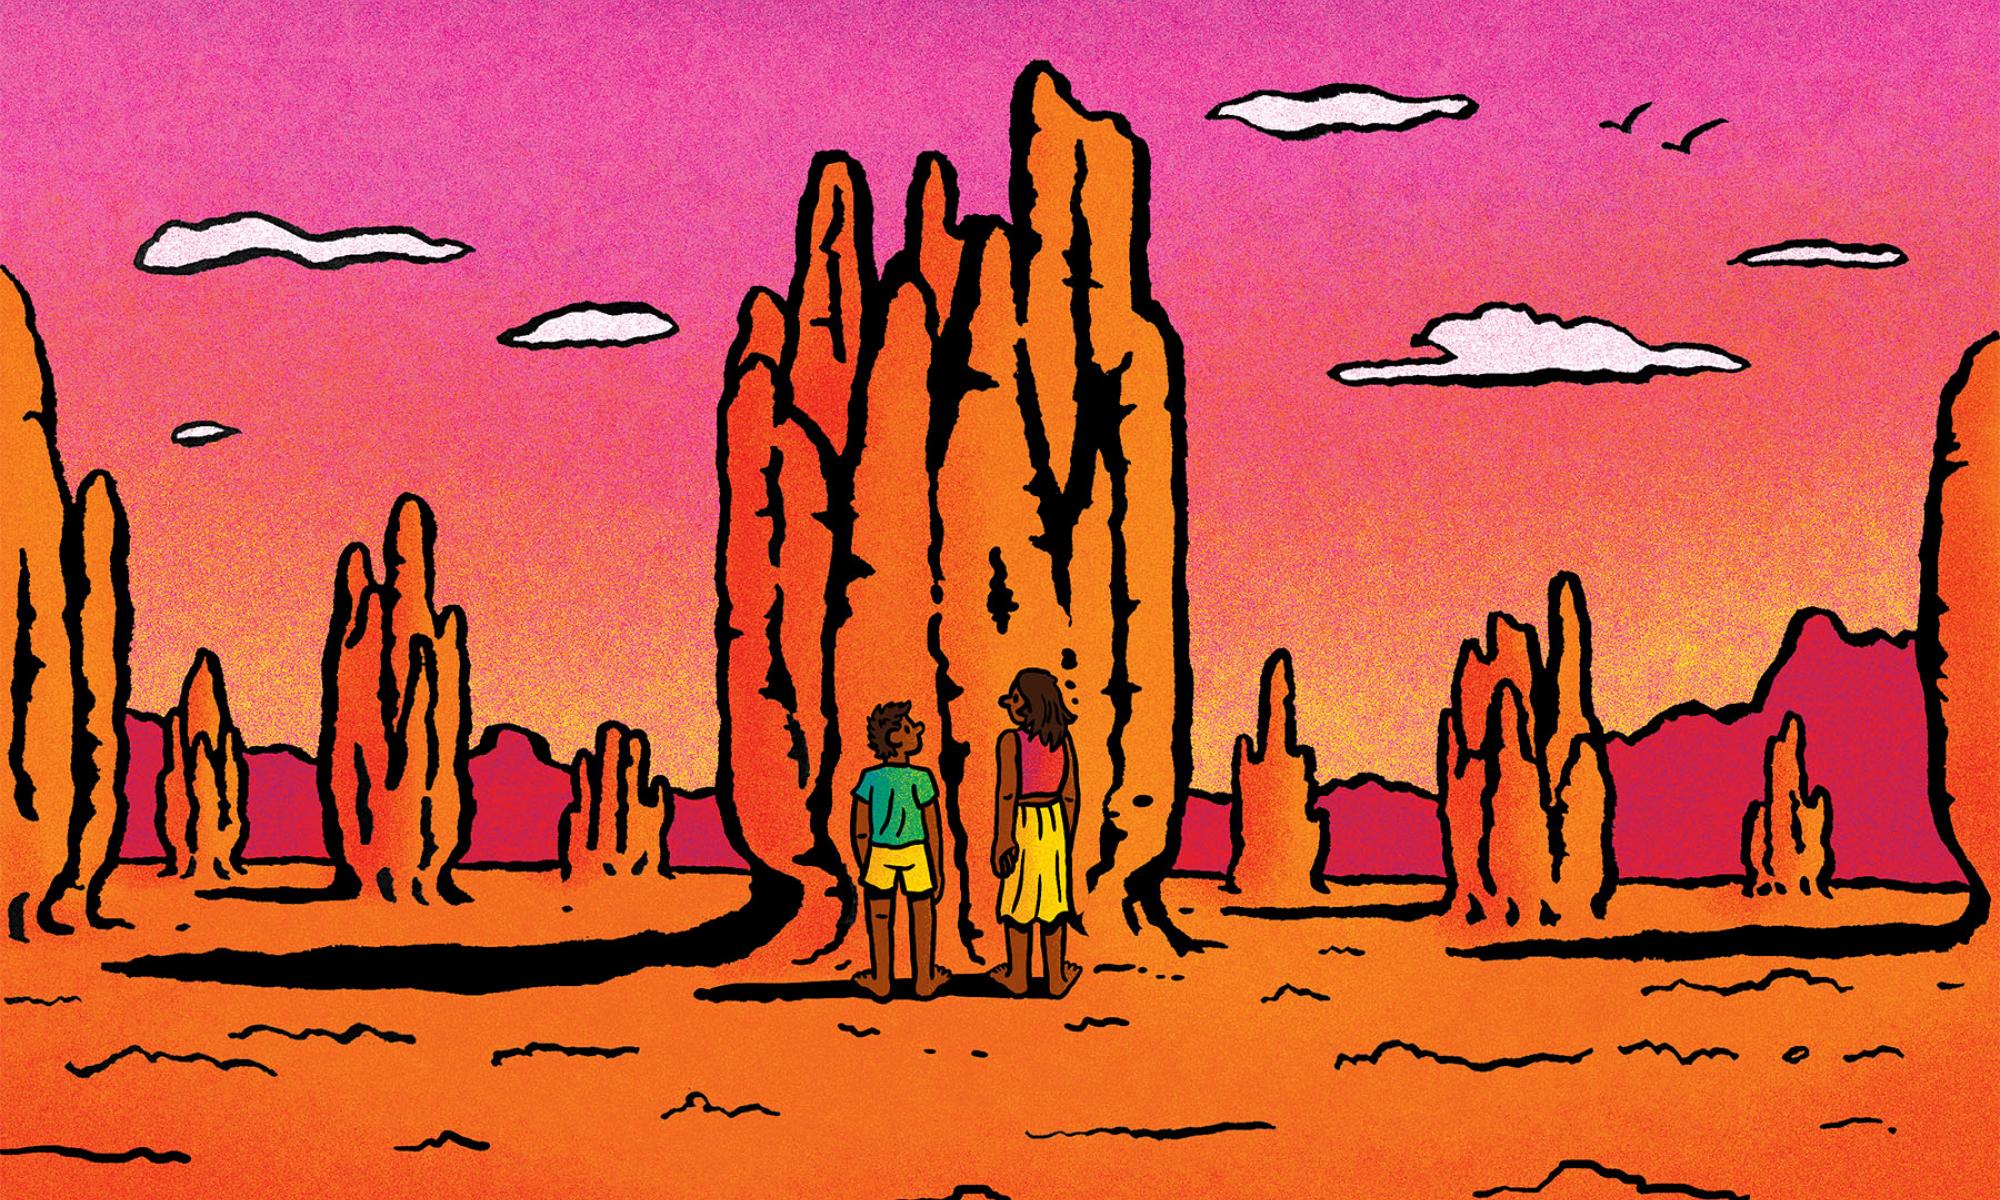 Illustration of two people conversing in front of a mound of earth in a desert environment. Illustrator: Ethan Carroll